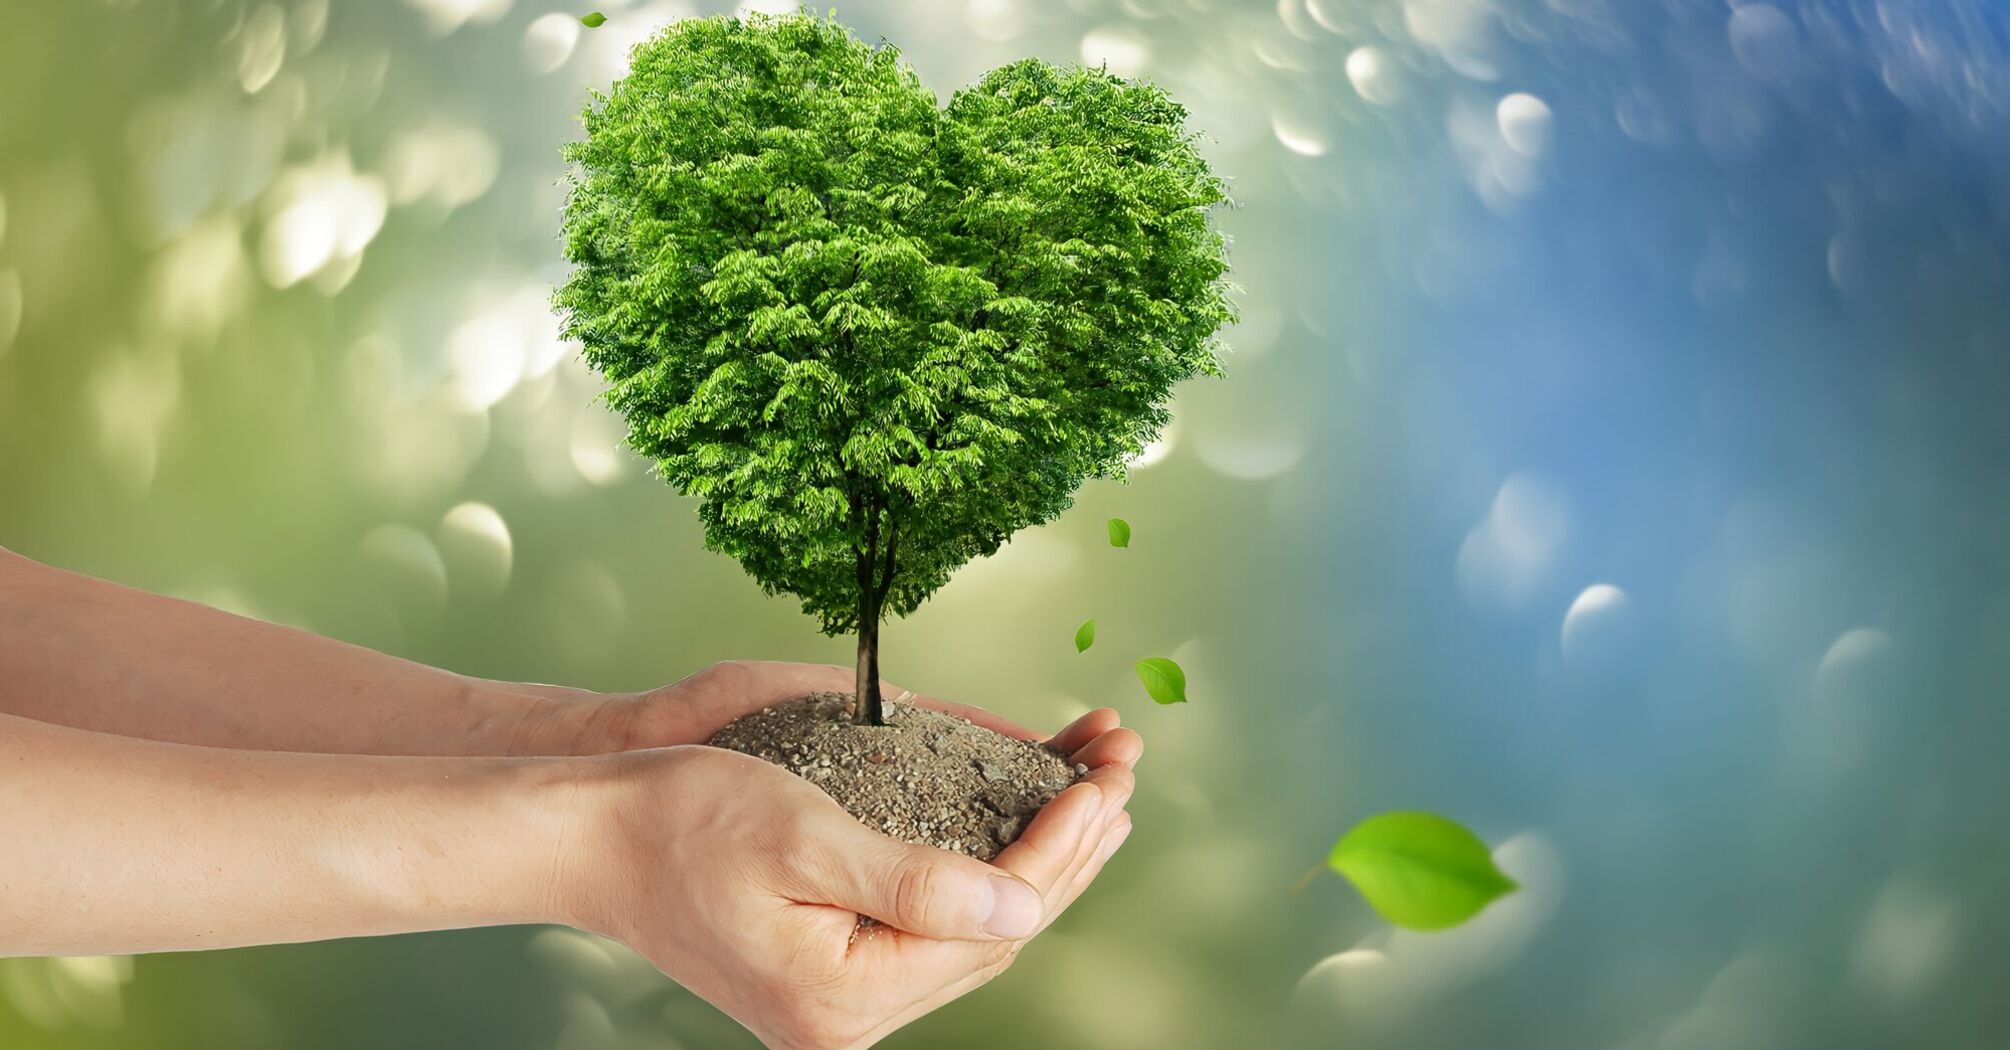 Hands holding a heart-shaped tree under a blurred green background